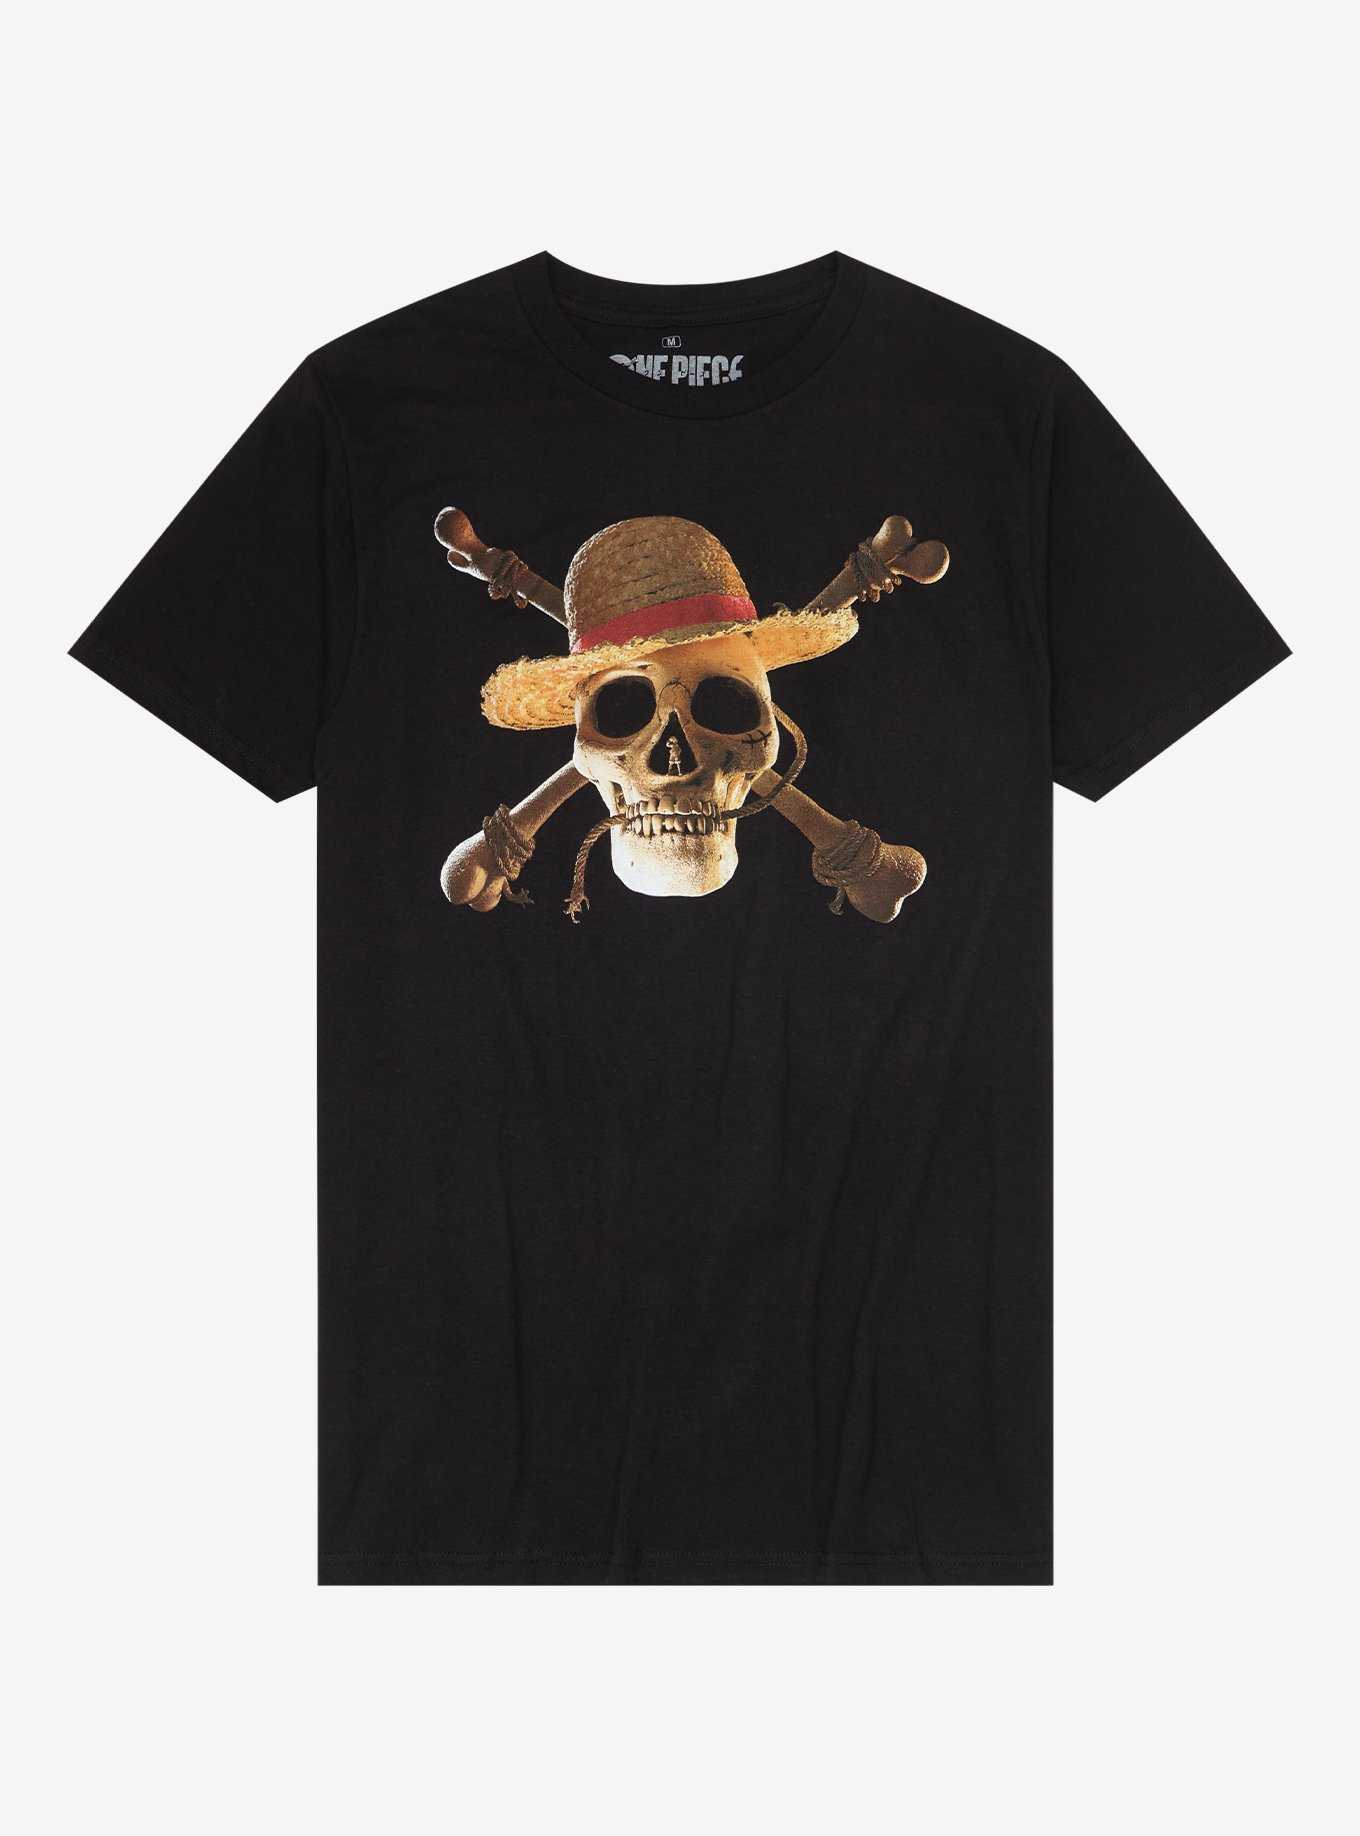 One Piece Straw Hats Live Action Jolly Roger T-Shirt, , hi-res